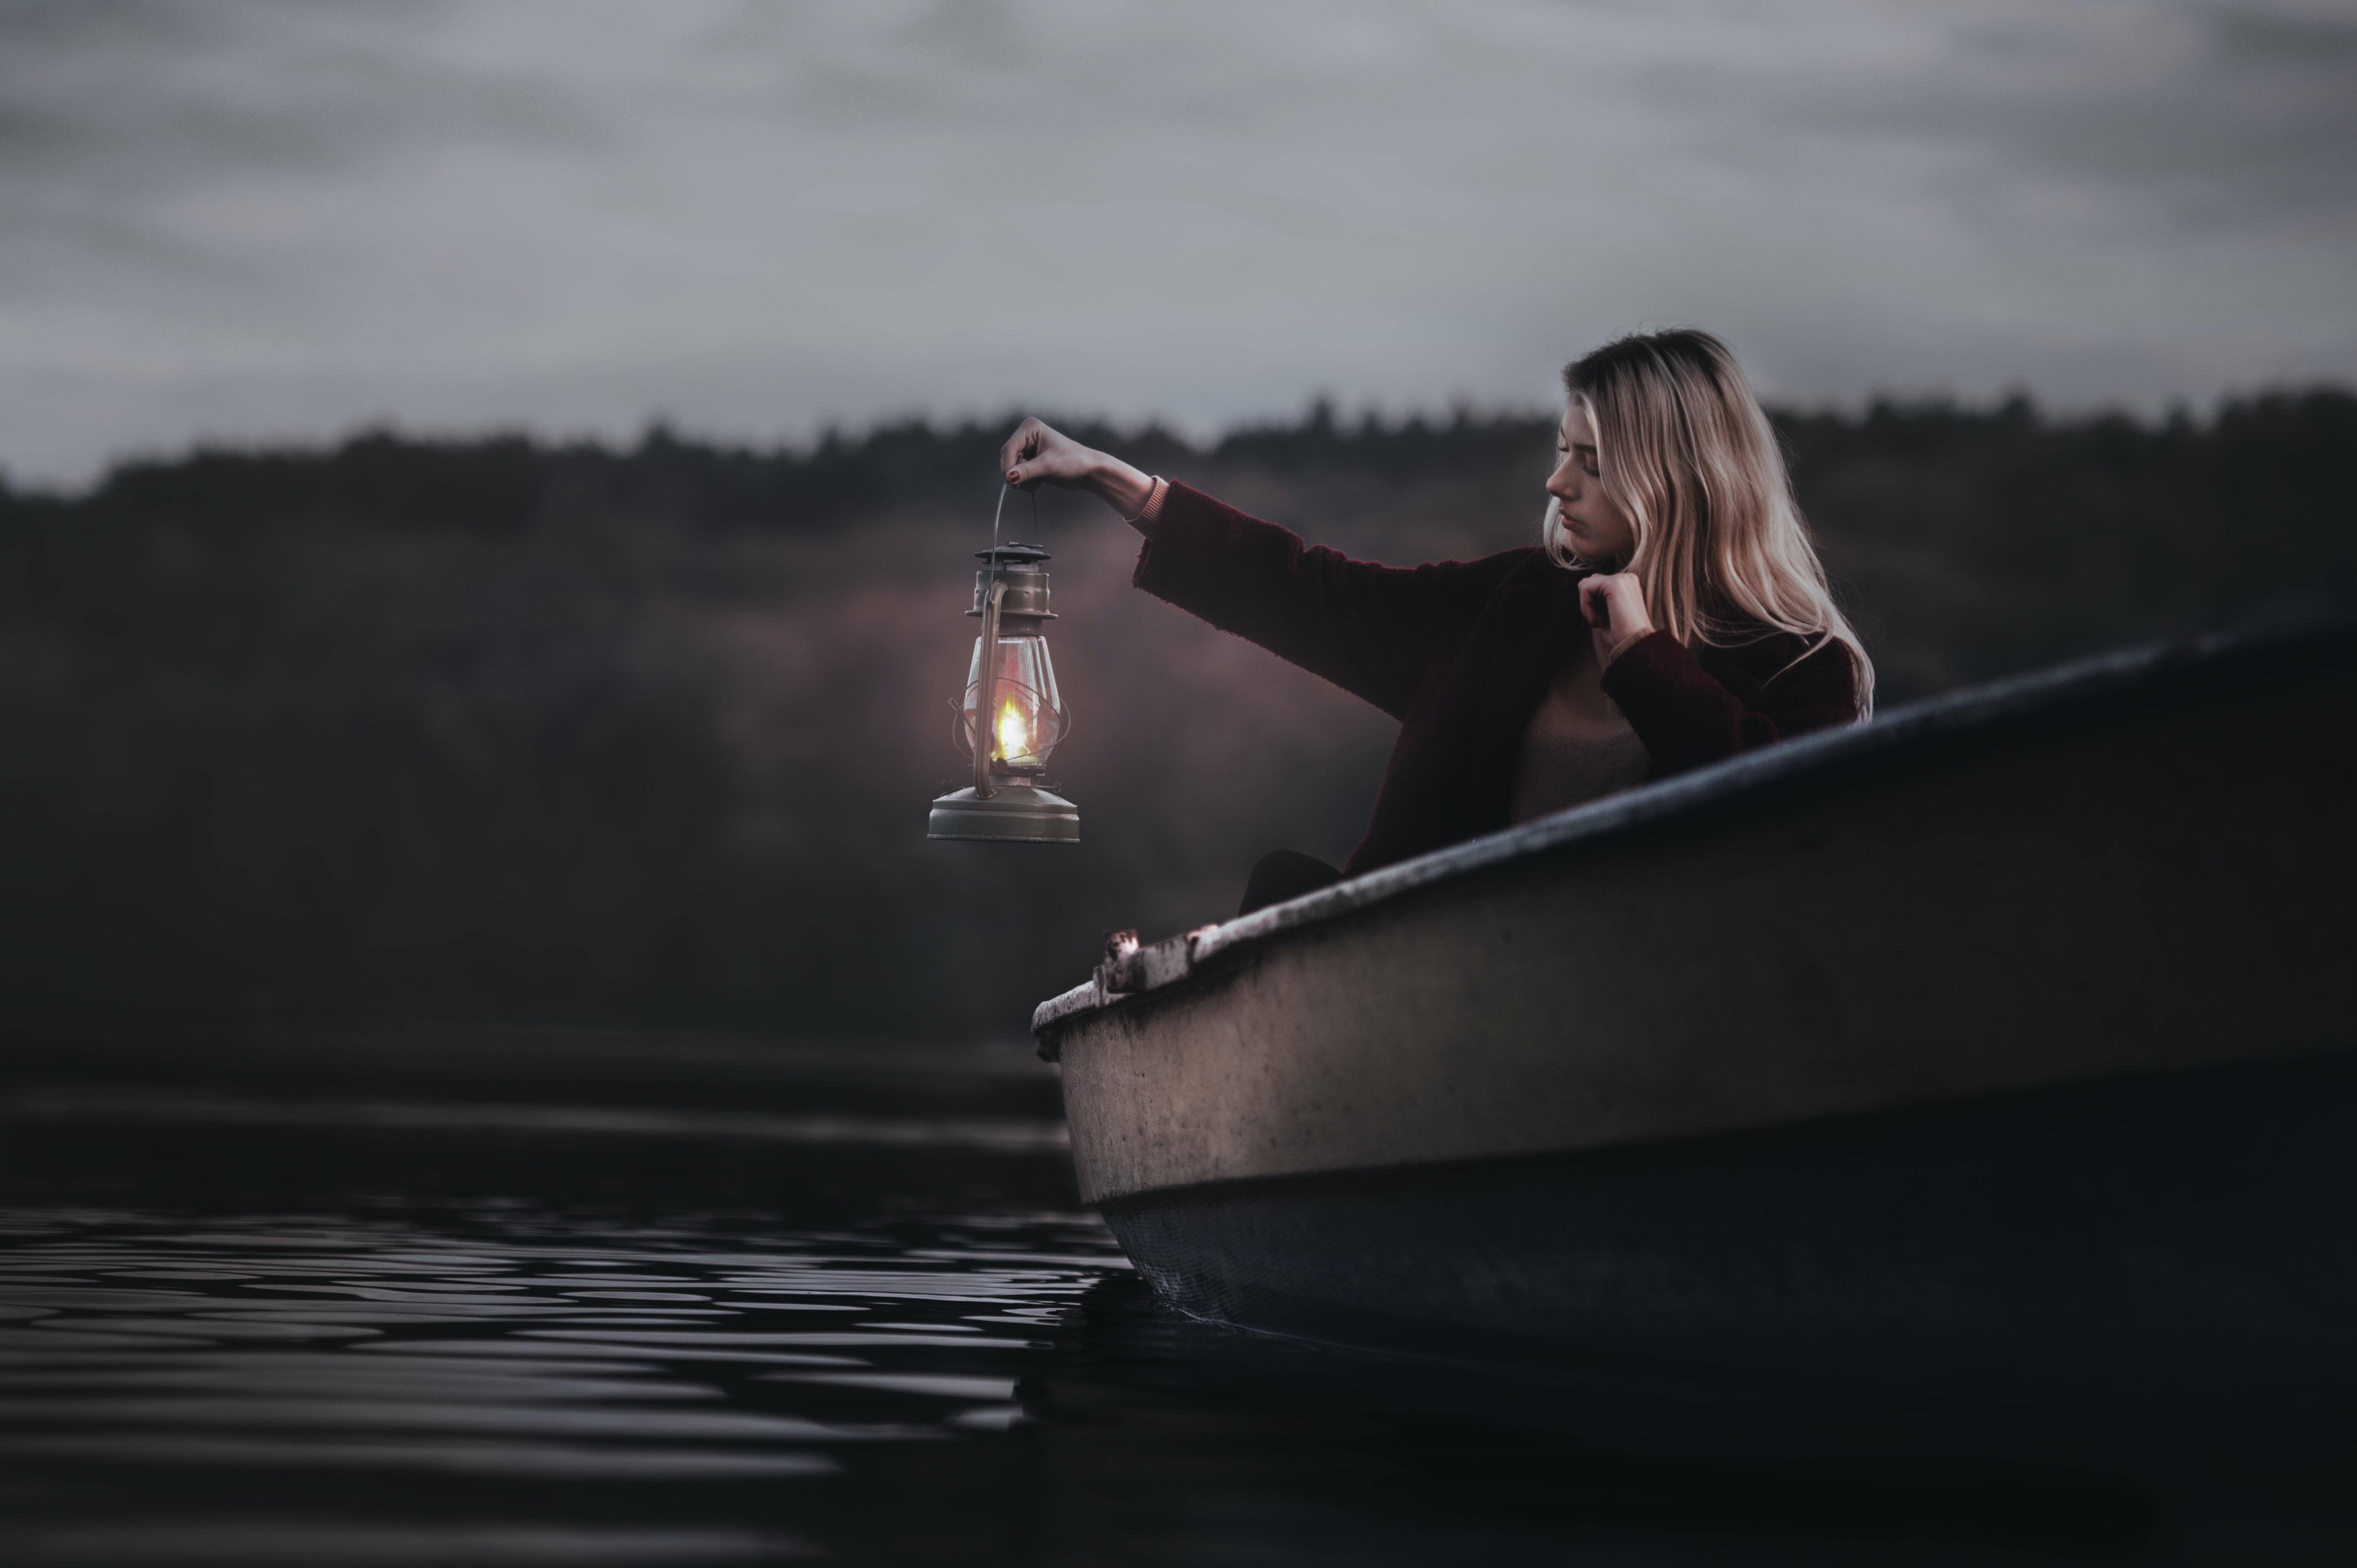 Woman On A Boat Holding Gas Lantern · Free